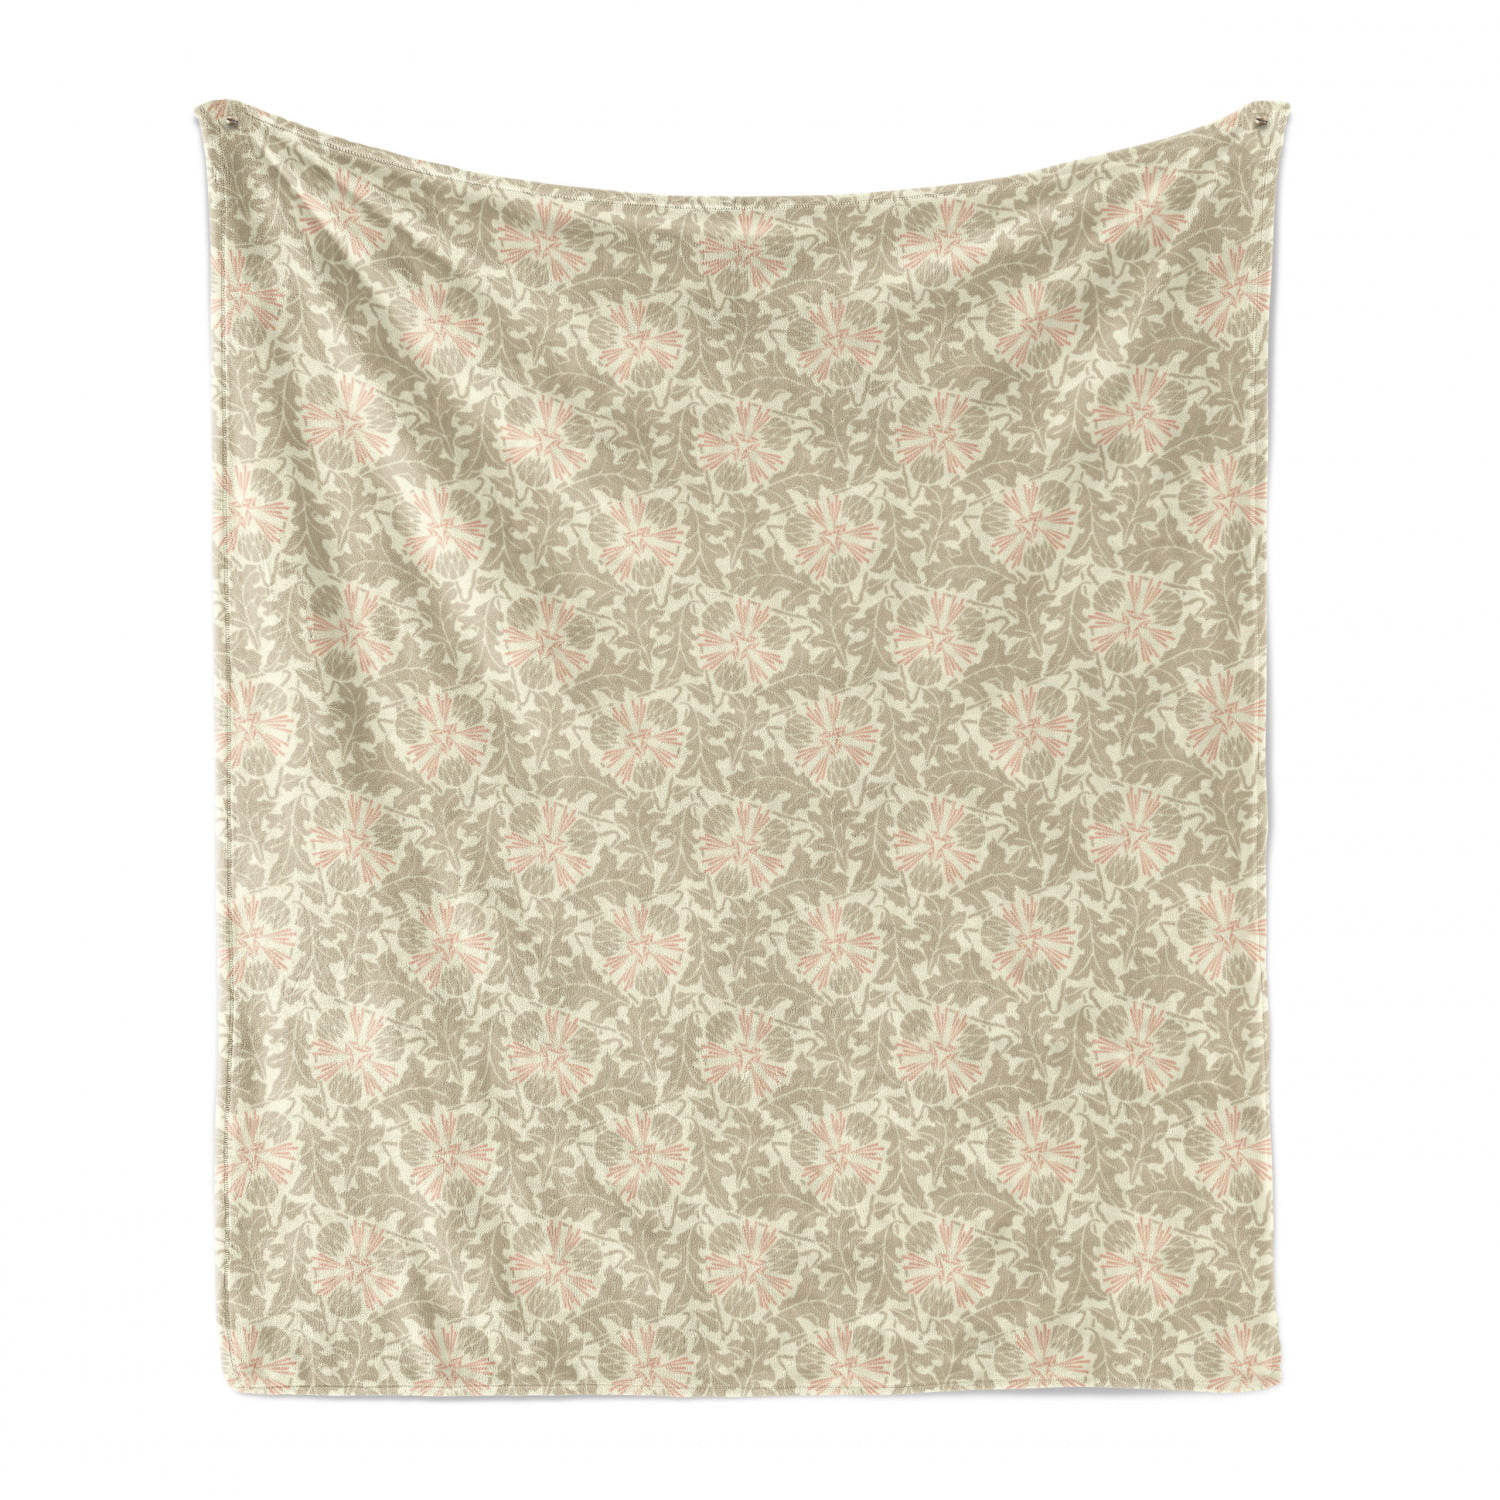 Cozy Plush for Indoor and Outdoor Use Ambesonne Abstract Soft Flannel Fleece Throw Blanket Cream Pale Sepia and Blush Dandelion Flower and Leaves Inspired Vintage Style Repeated Motifs 50 x 70 